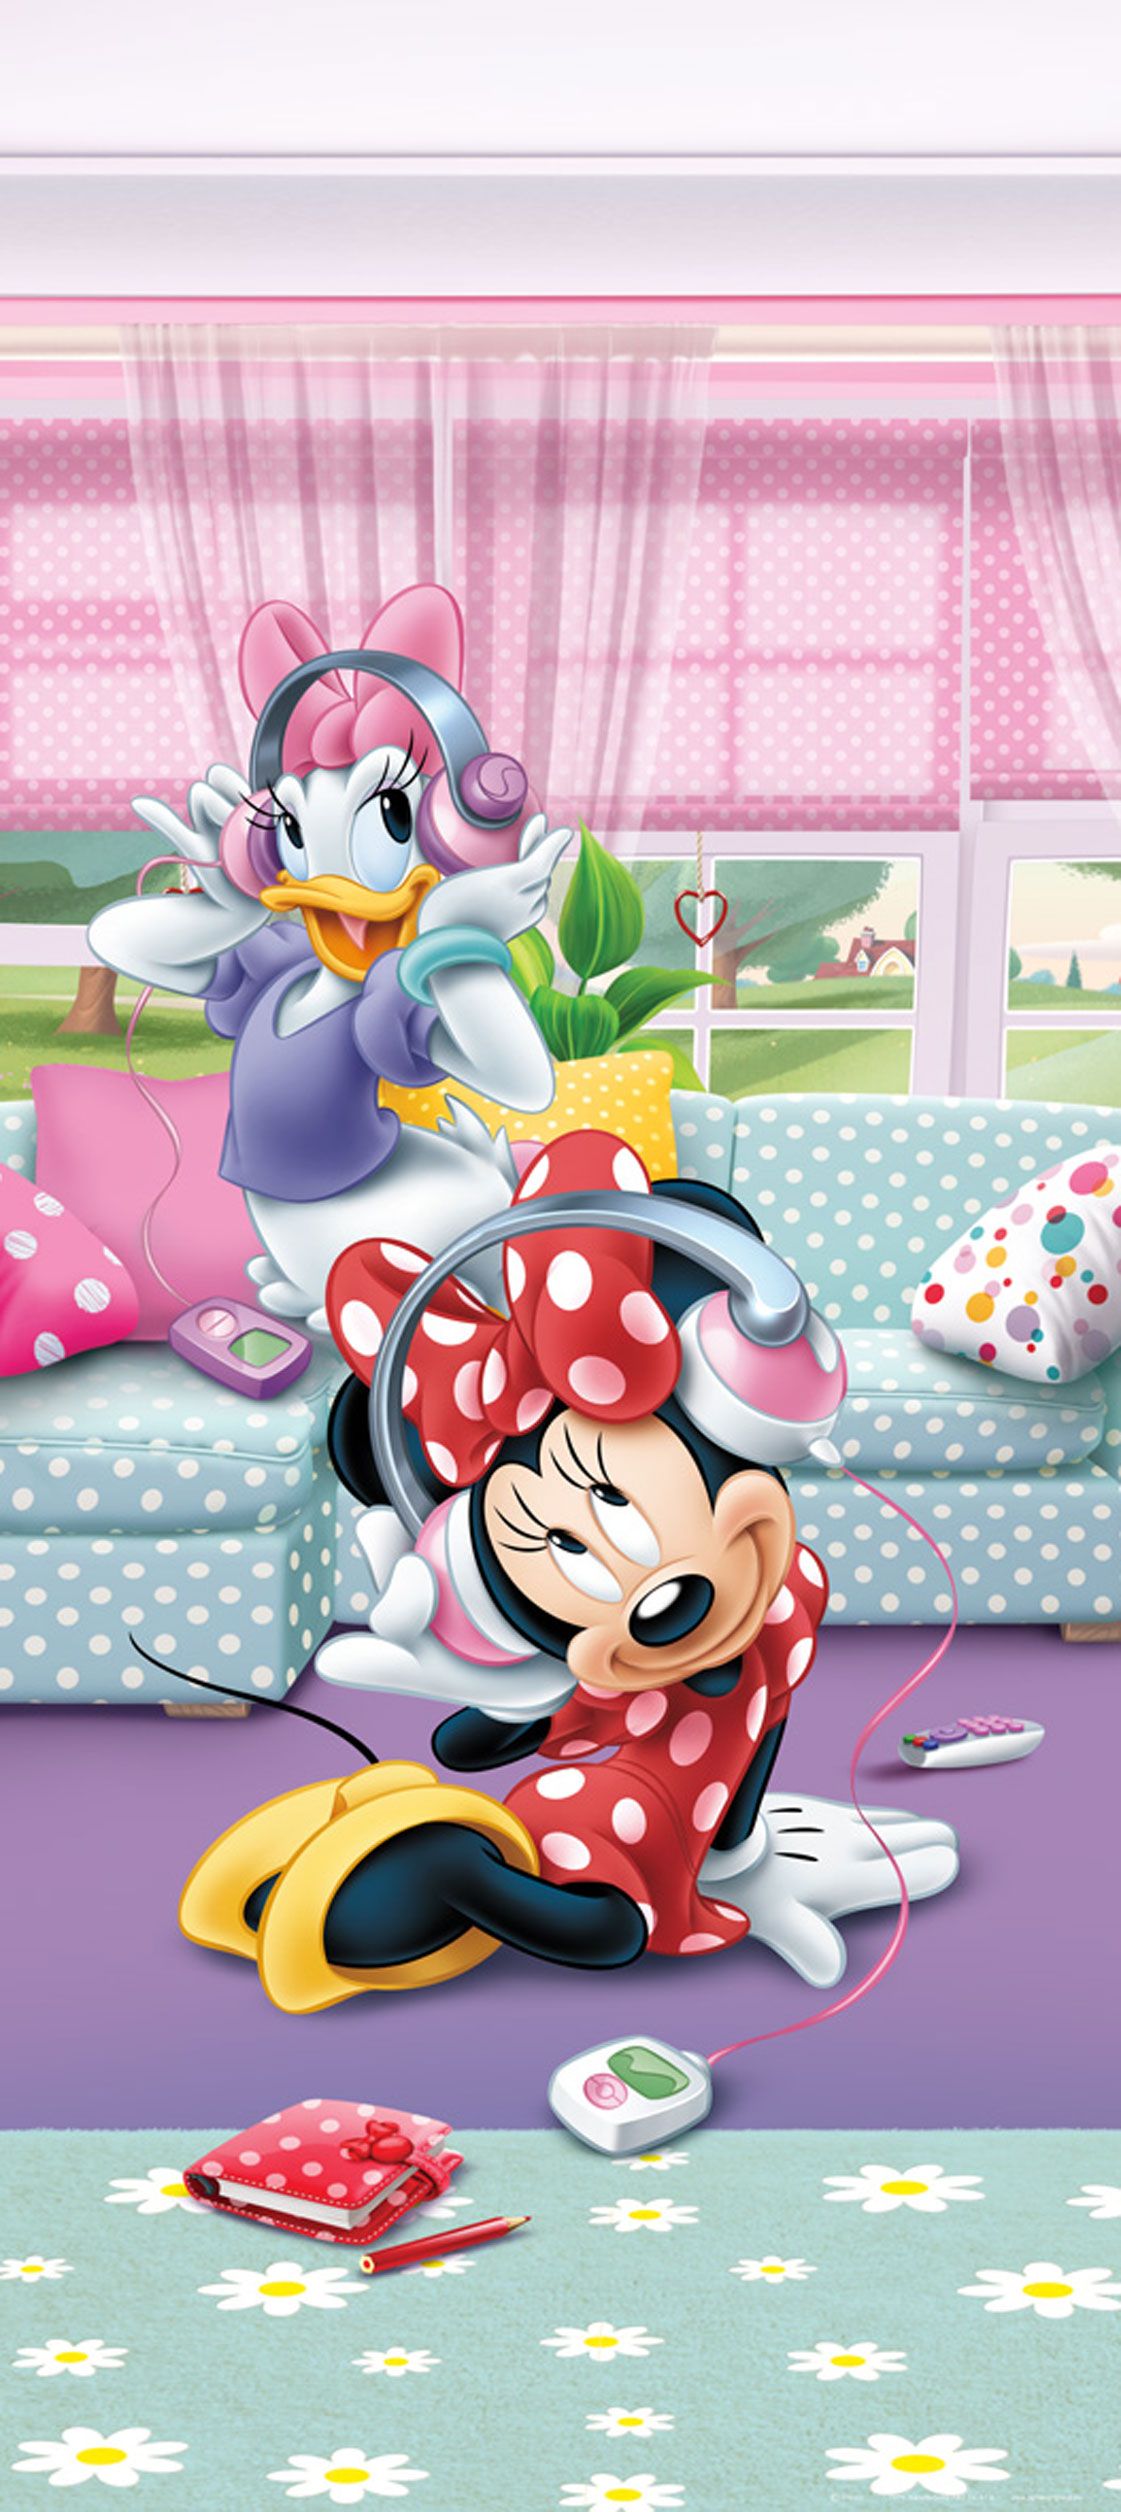 poster Minnie Mouse & Daisy Duck pink, purple and red from Sanders & Sanders